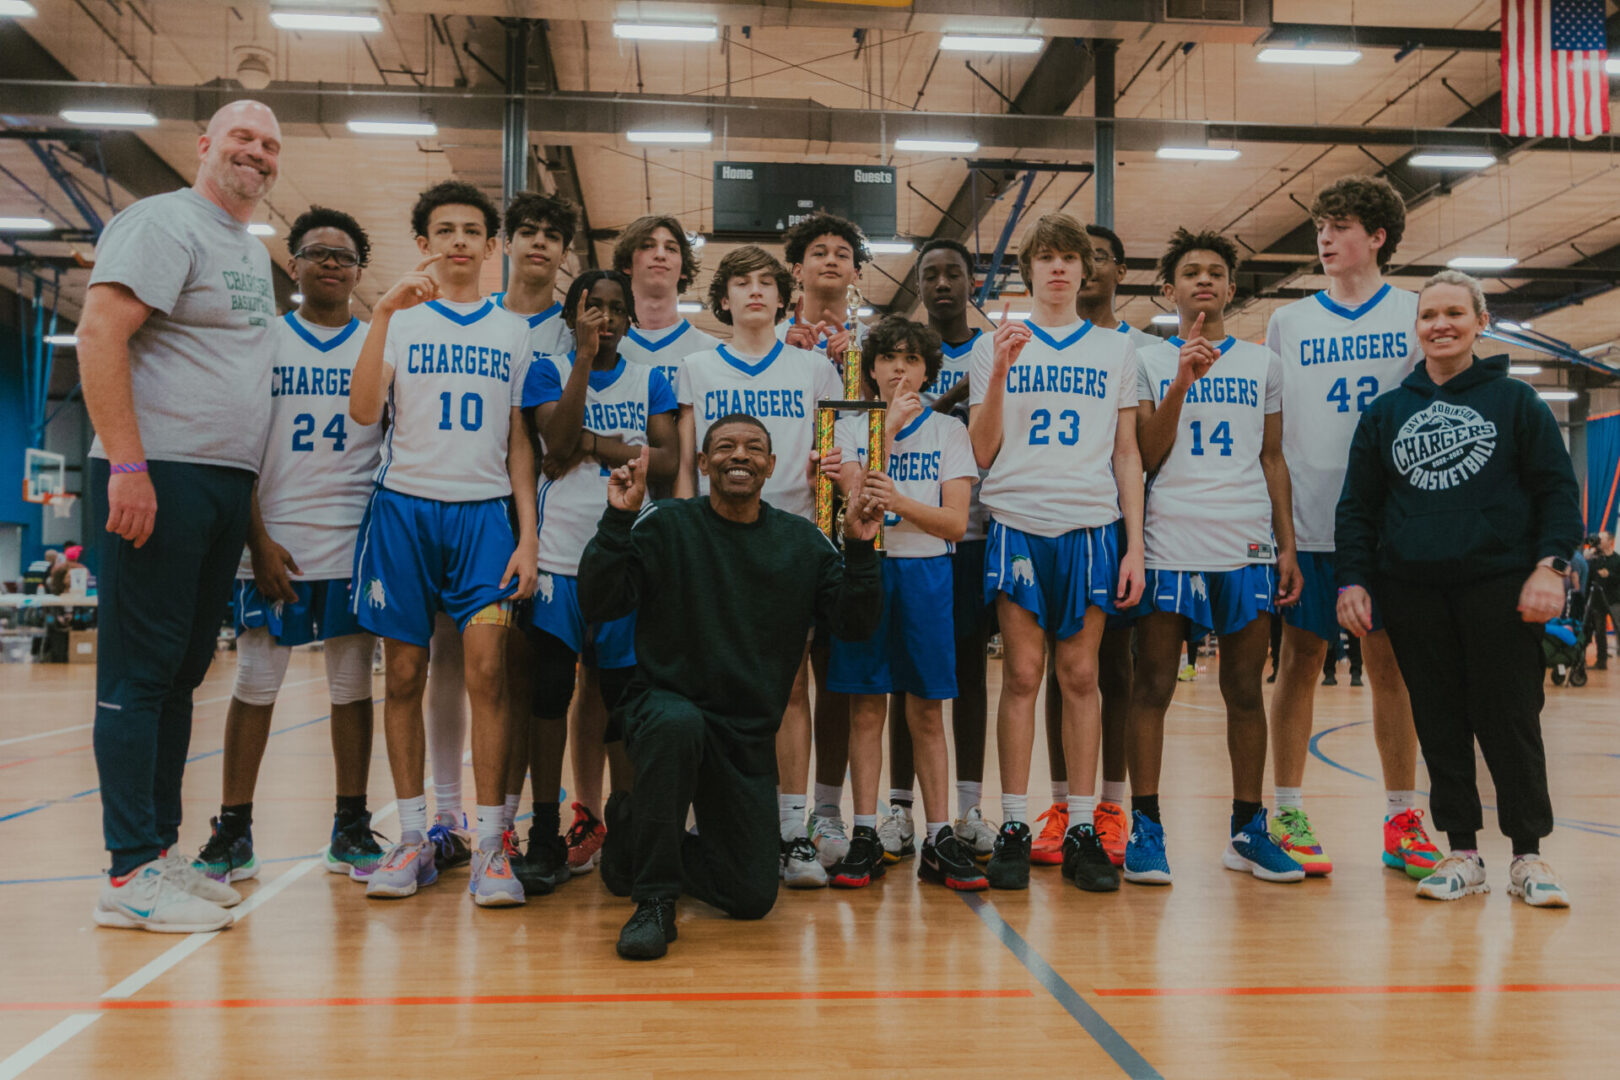 The inaugural 2023 Muggsy Bogues Middle School Basketball Tournament was a huge success with boys' and girls' teams vying to be the champion